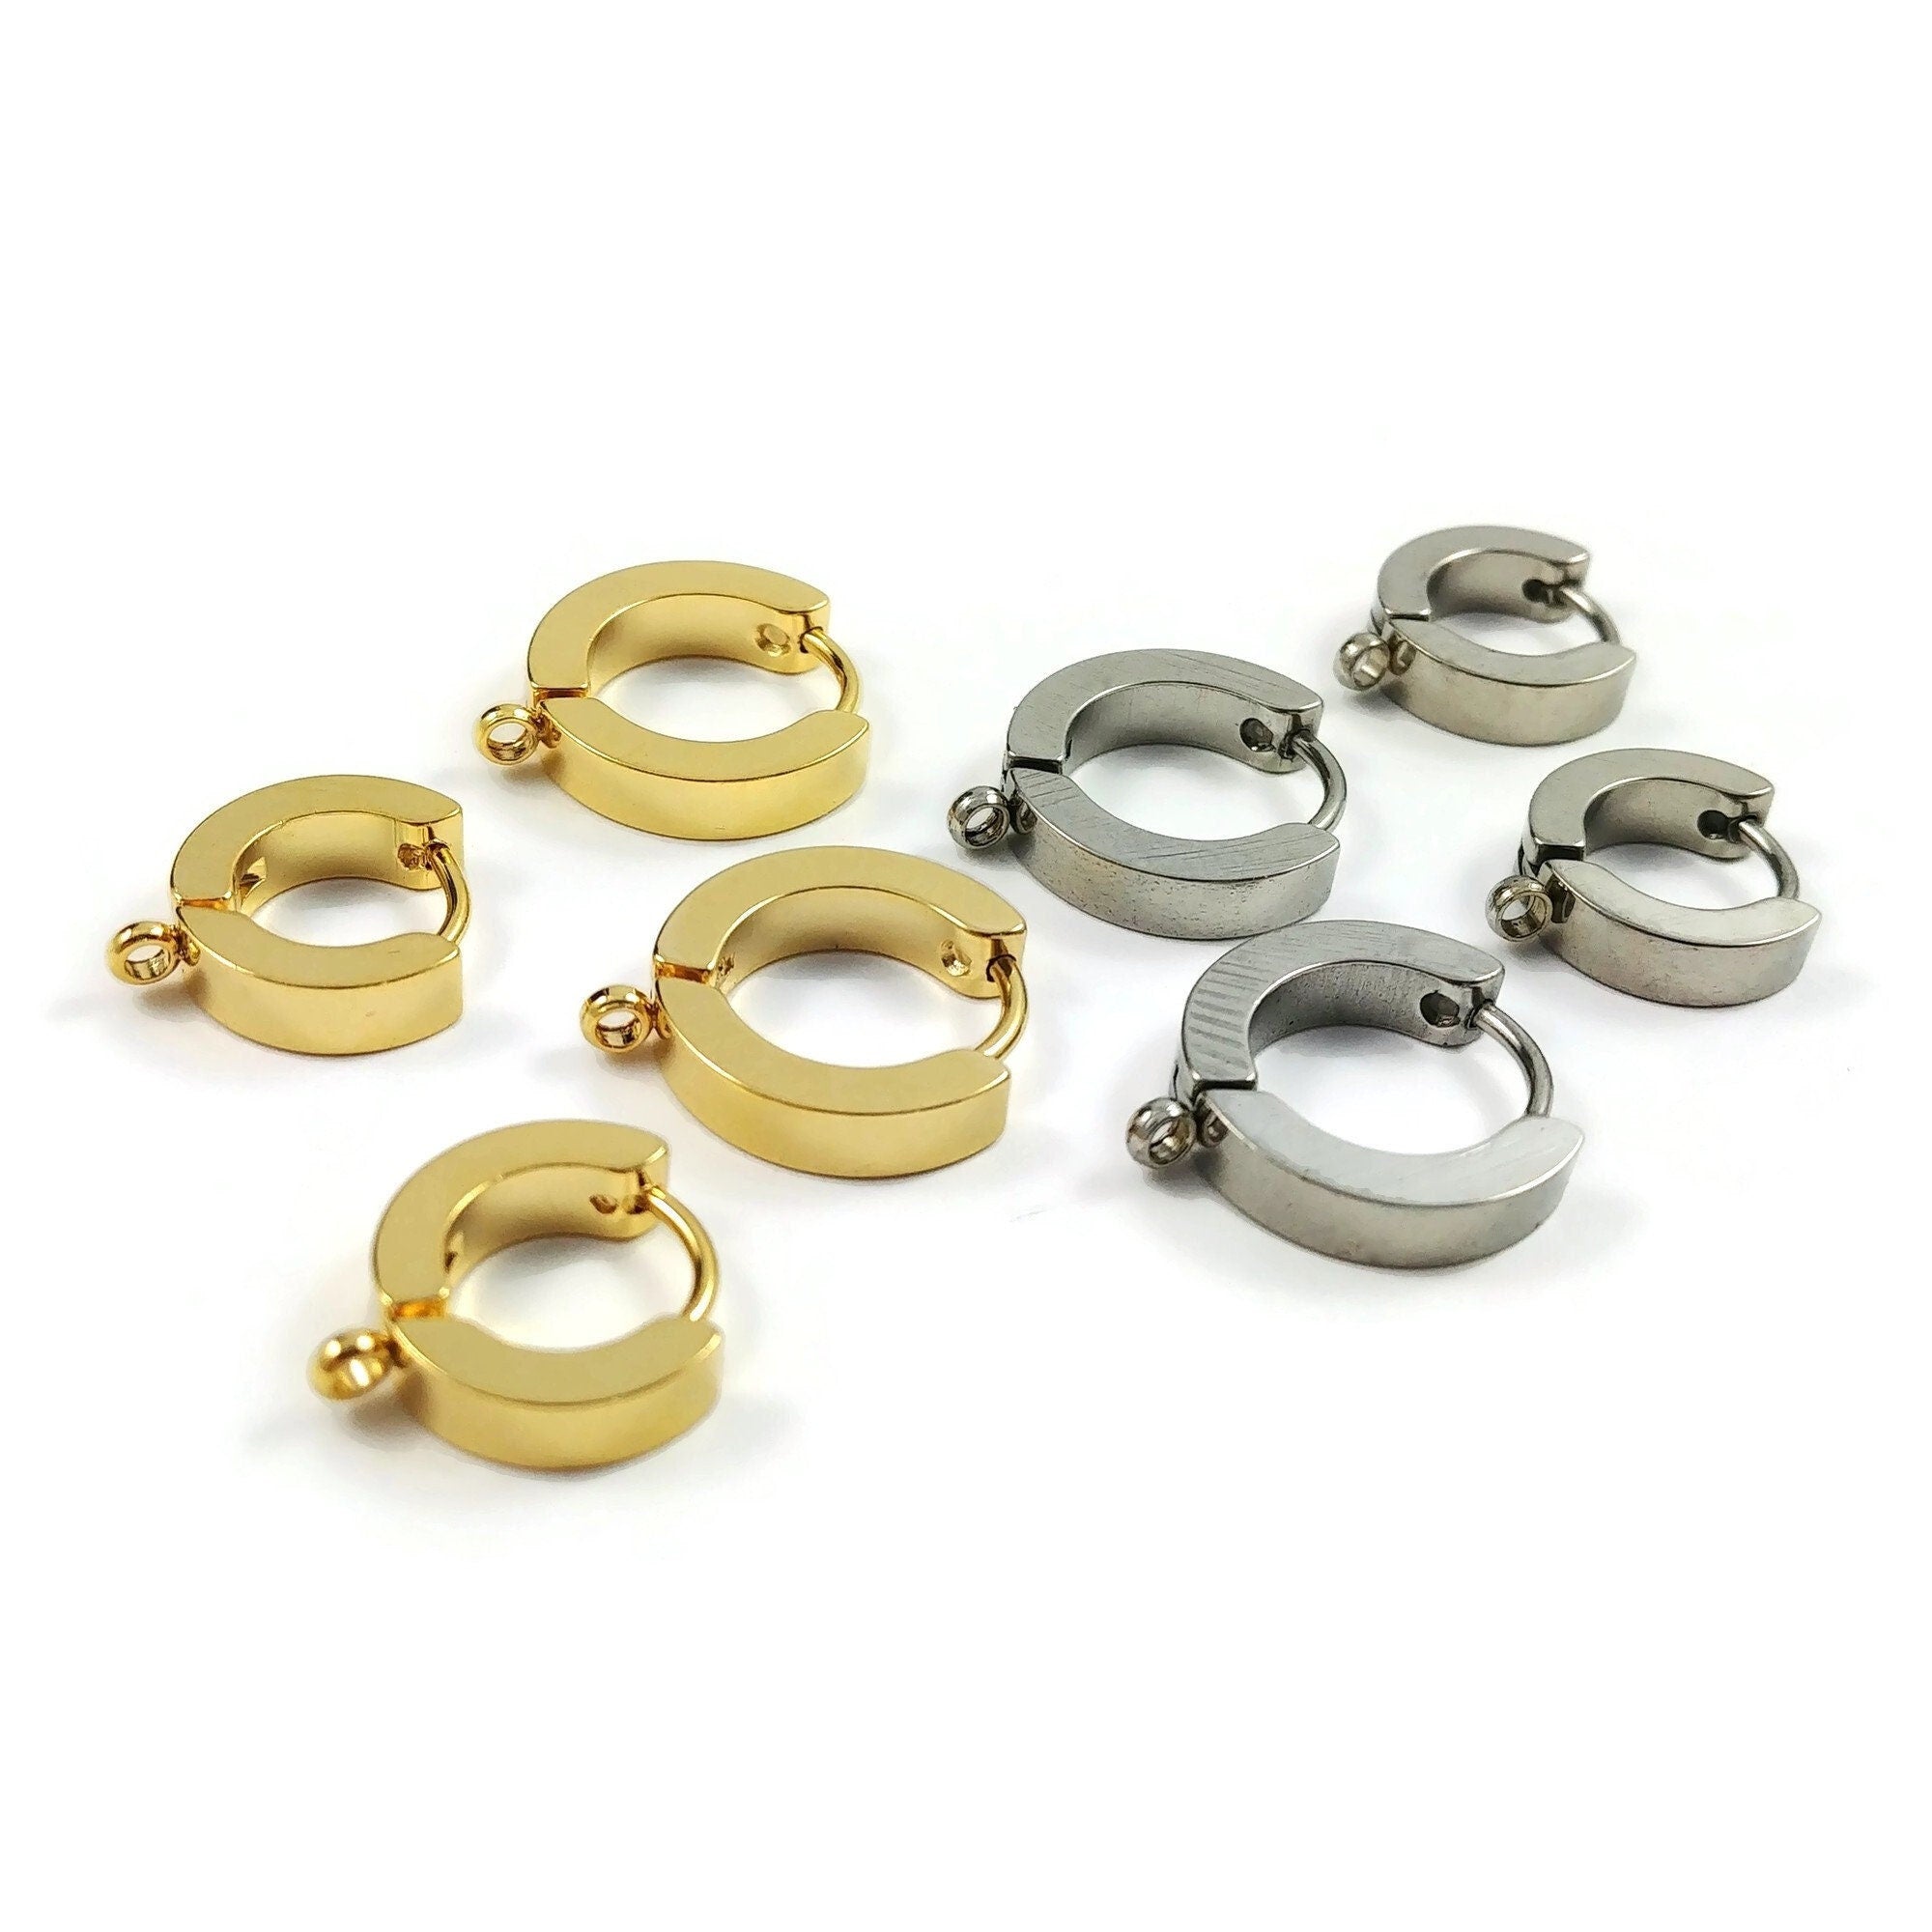 CYM-EB-300687-GP - Stainless Steel Earring Back - 24K Gold Plate